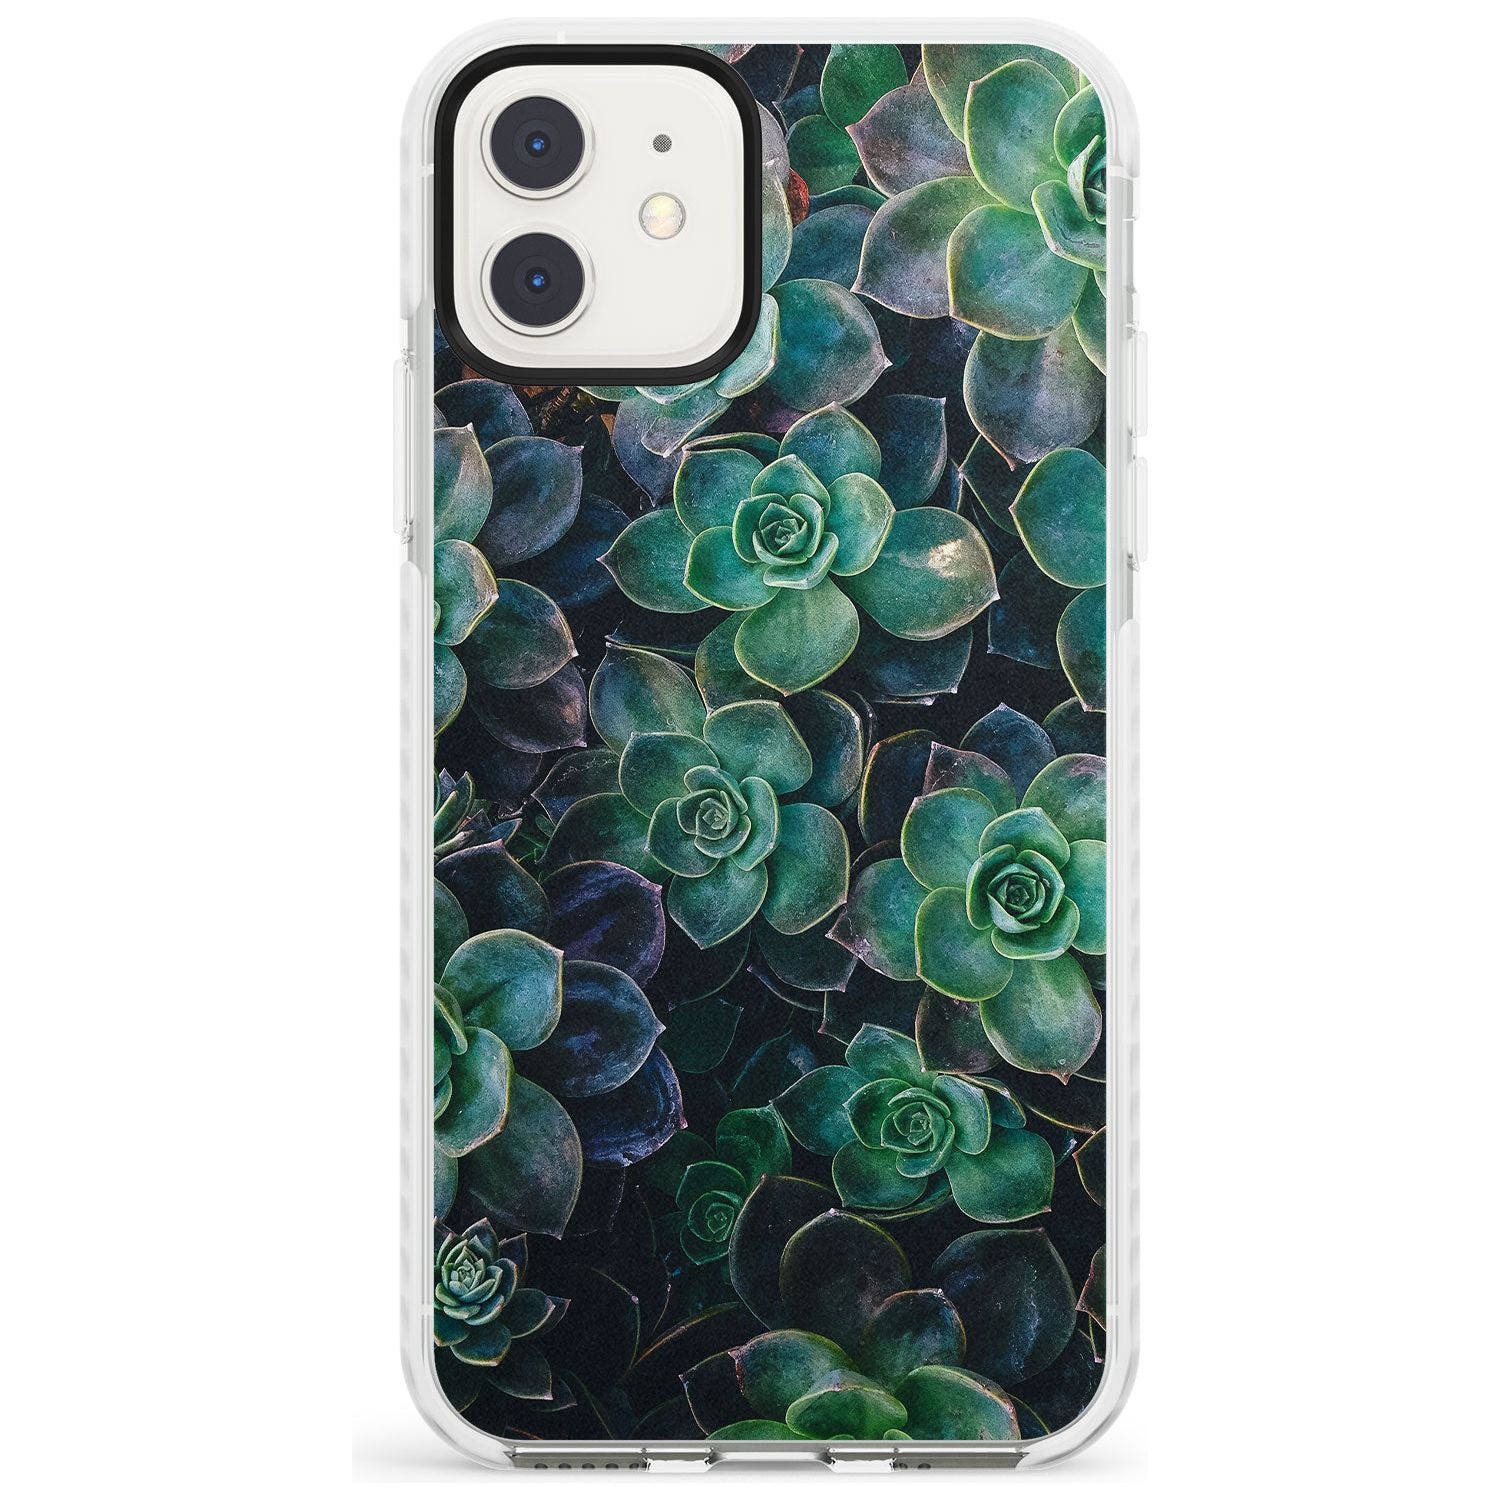 Succulents - Real Botanical Photographs Impact Phone Case for iPhone 11